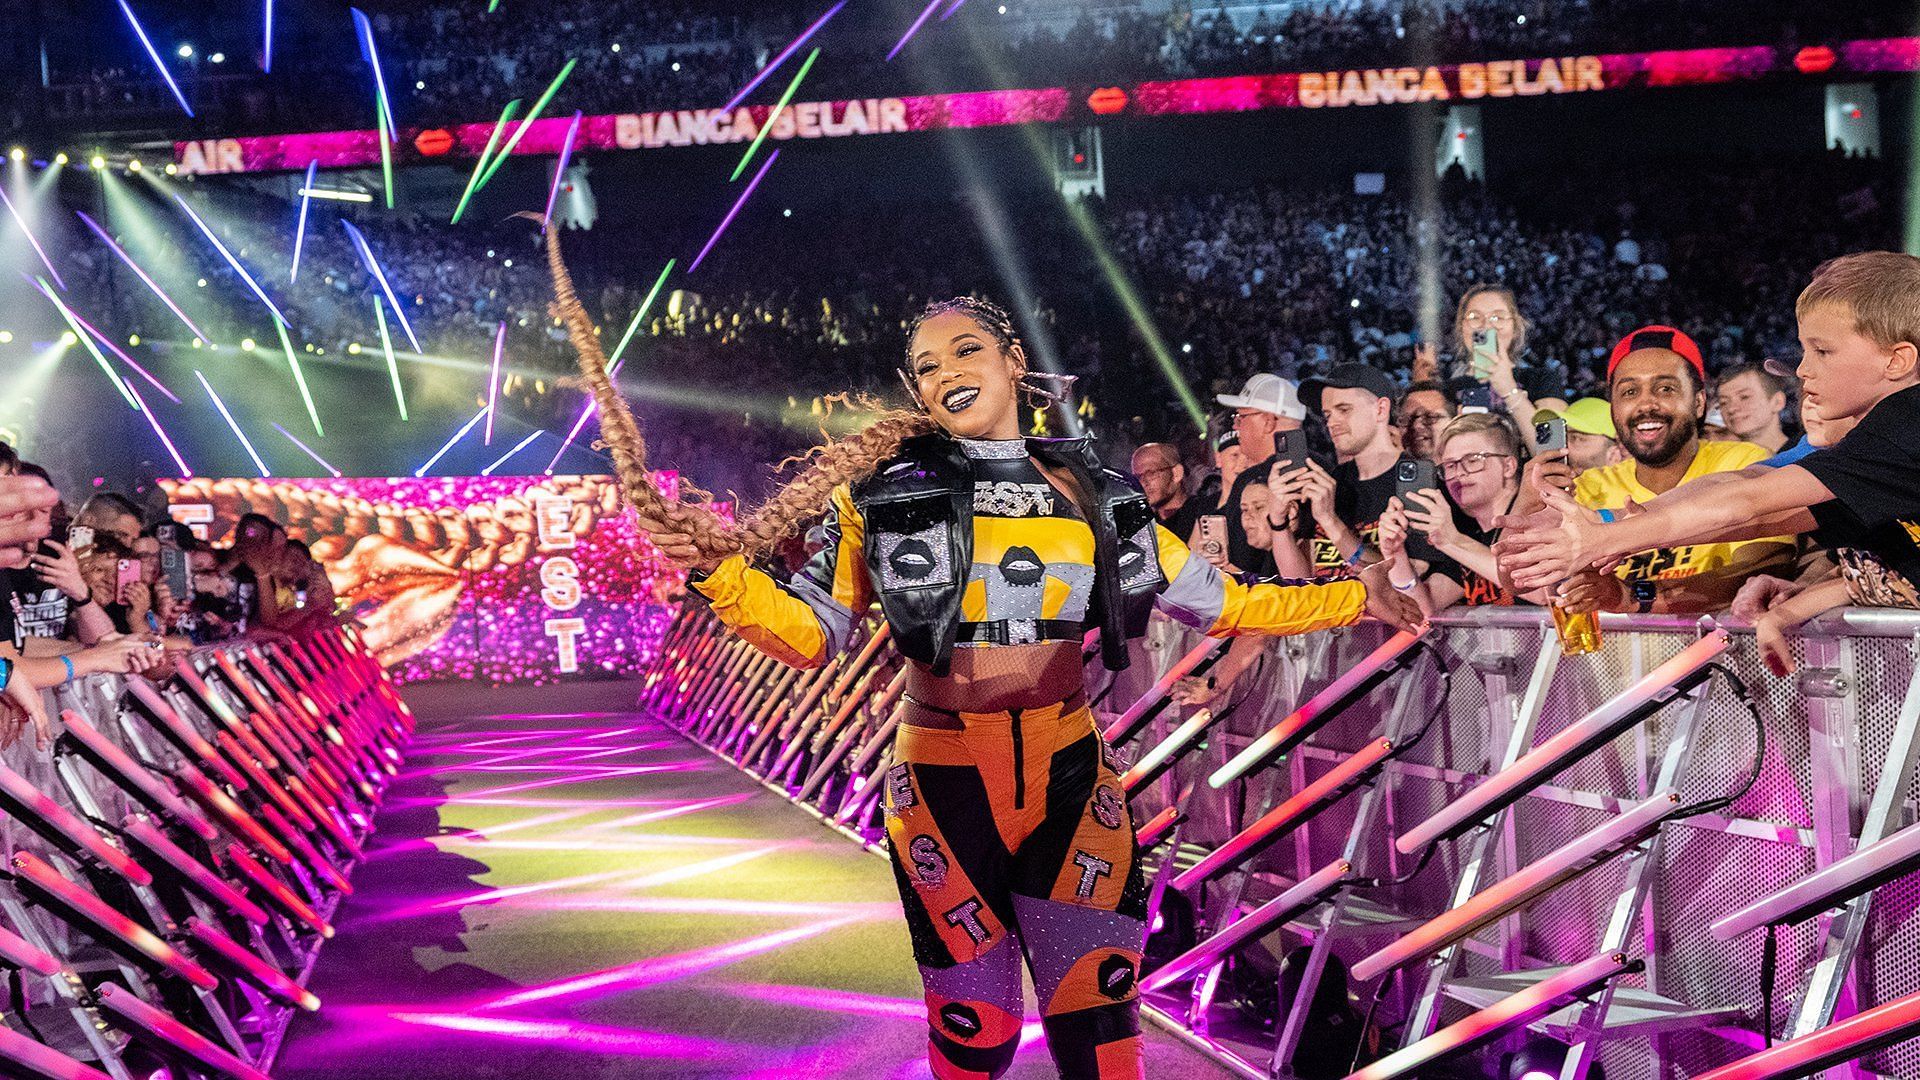 Bianca Belair smiles for the WWE Universe on the way to the ring